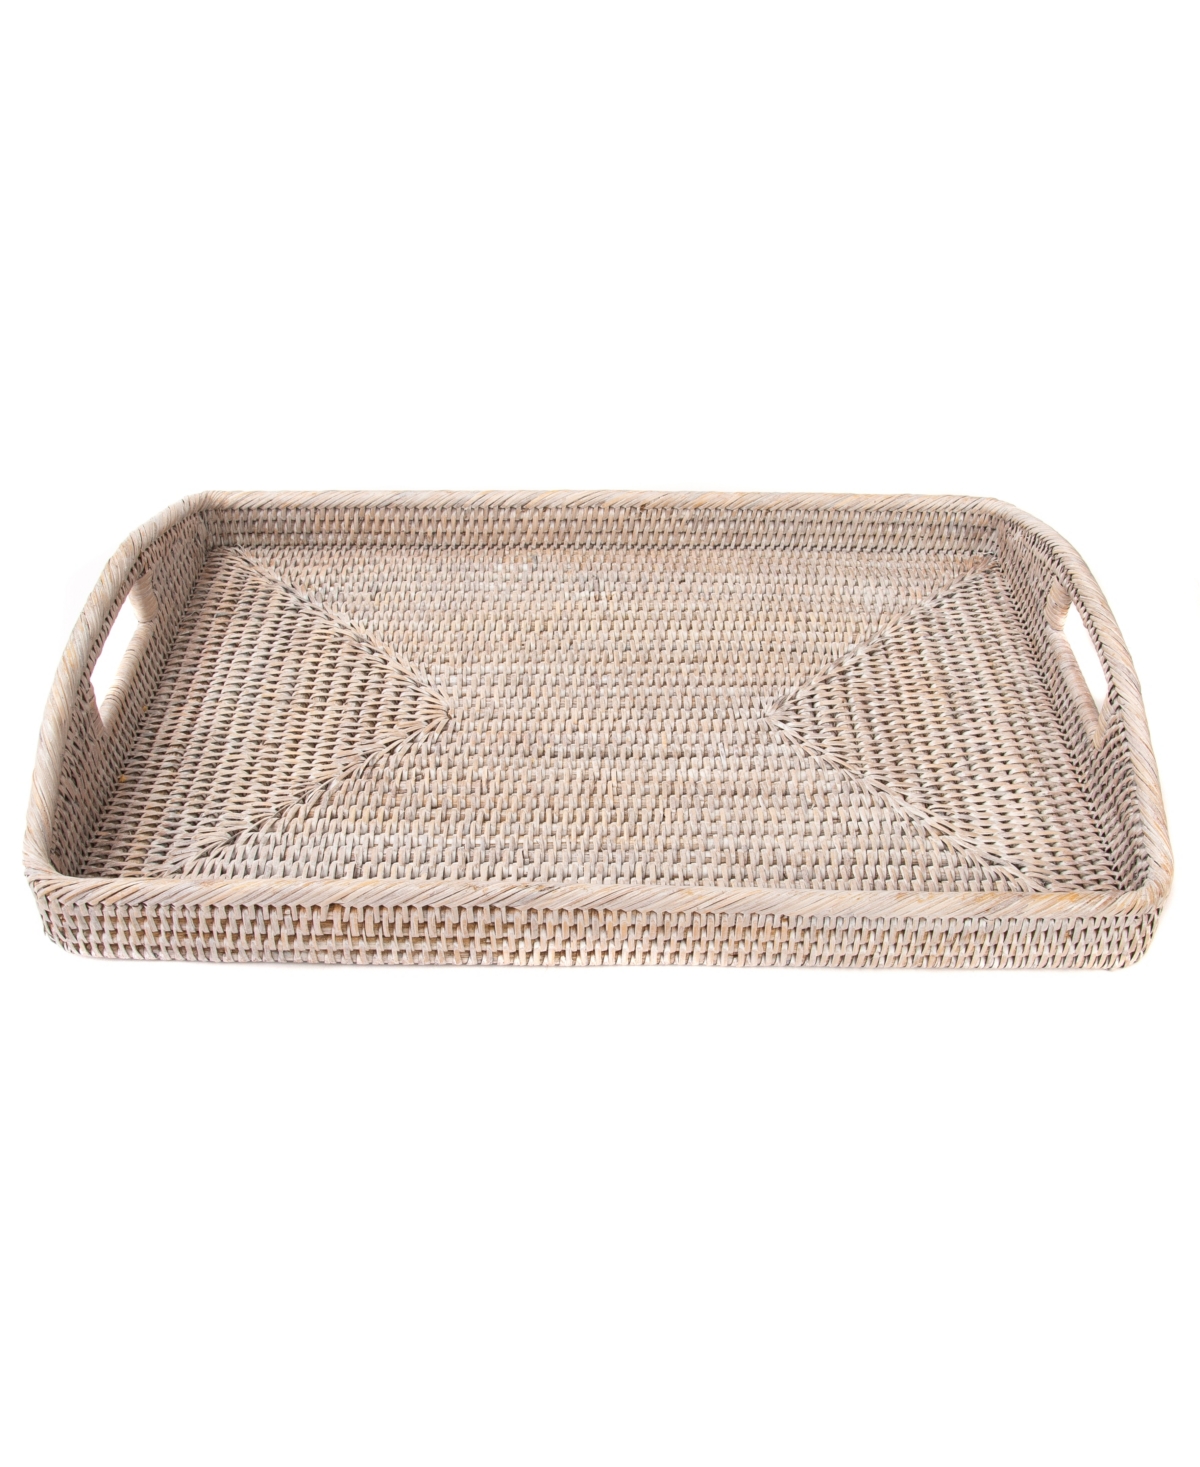 Shop Artifacts Trading Company Artifacts Rattan Rectangular Serving Tray In Off-white